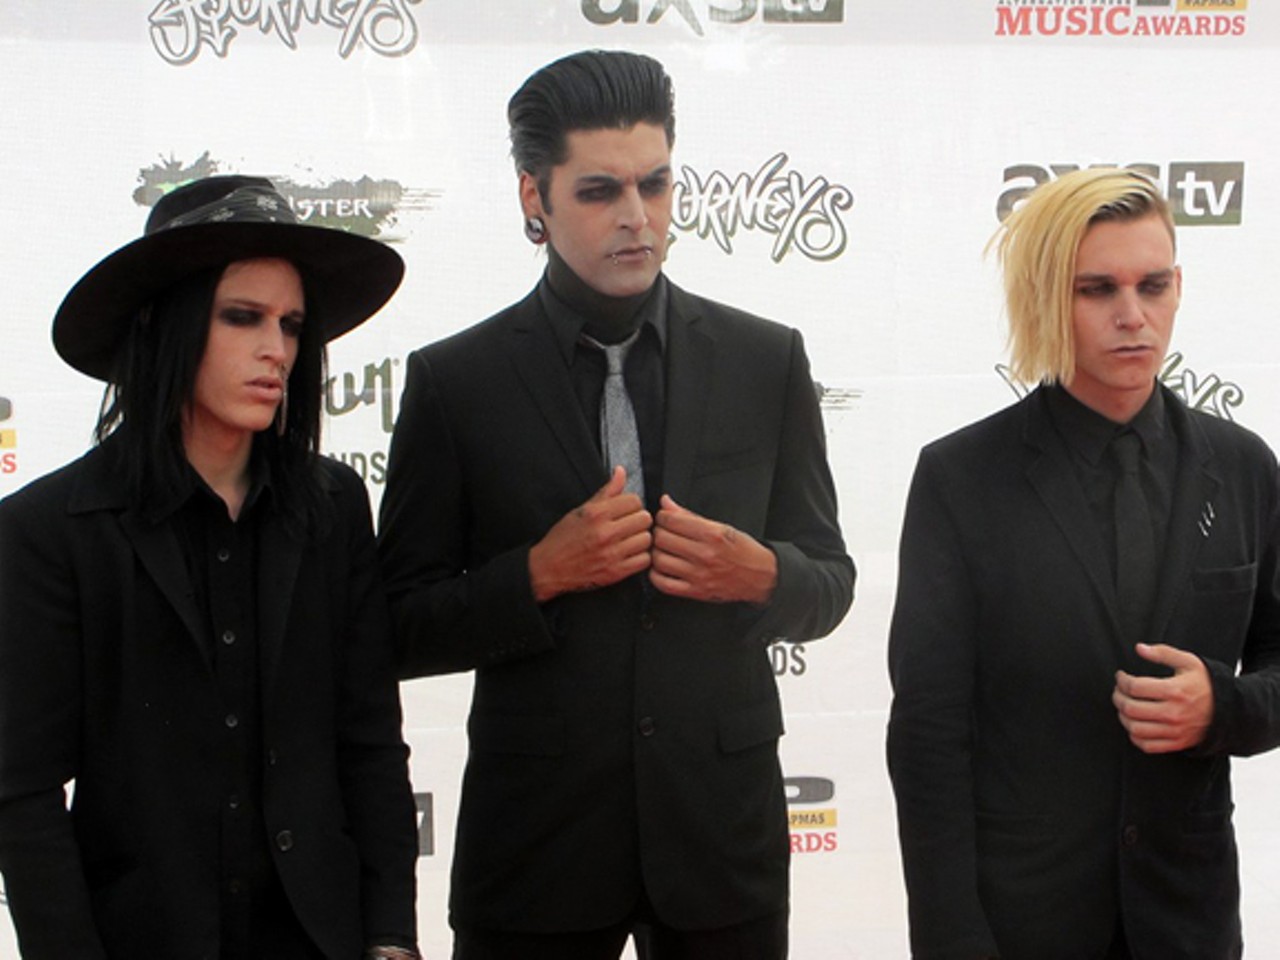 Why so serious? At the AP Music Awards Red Carpet, photo by Jeff Niesel